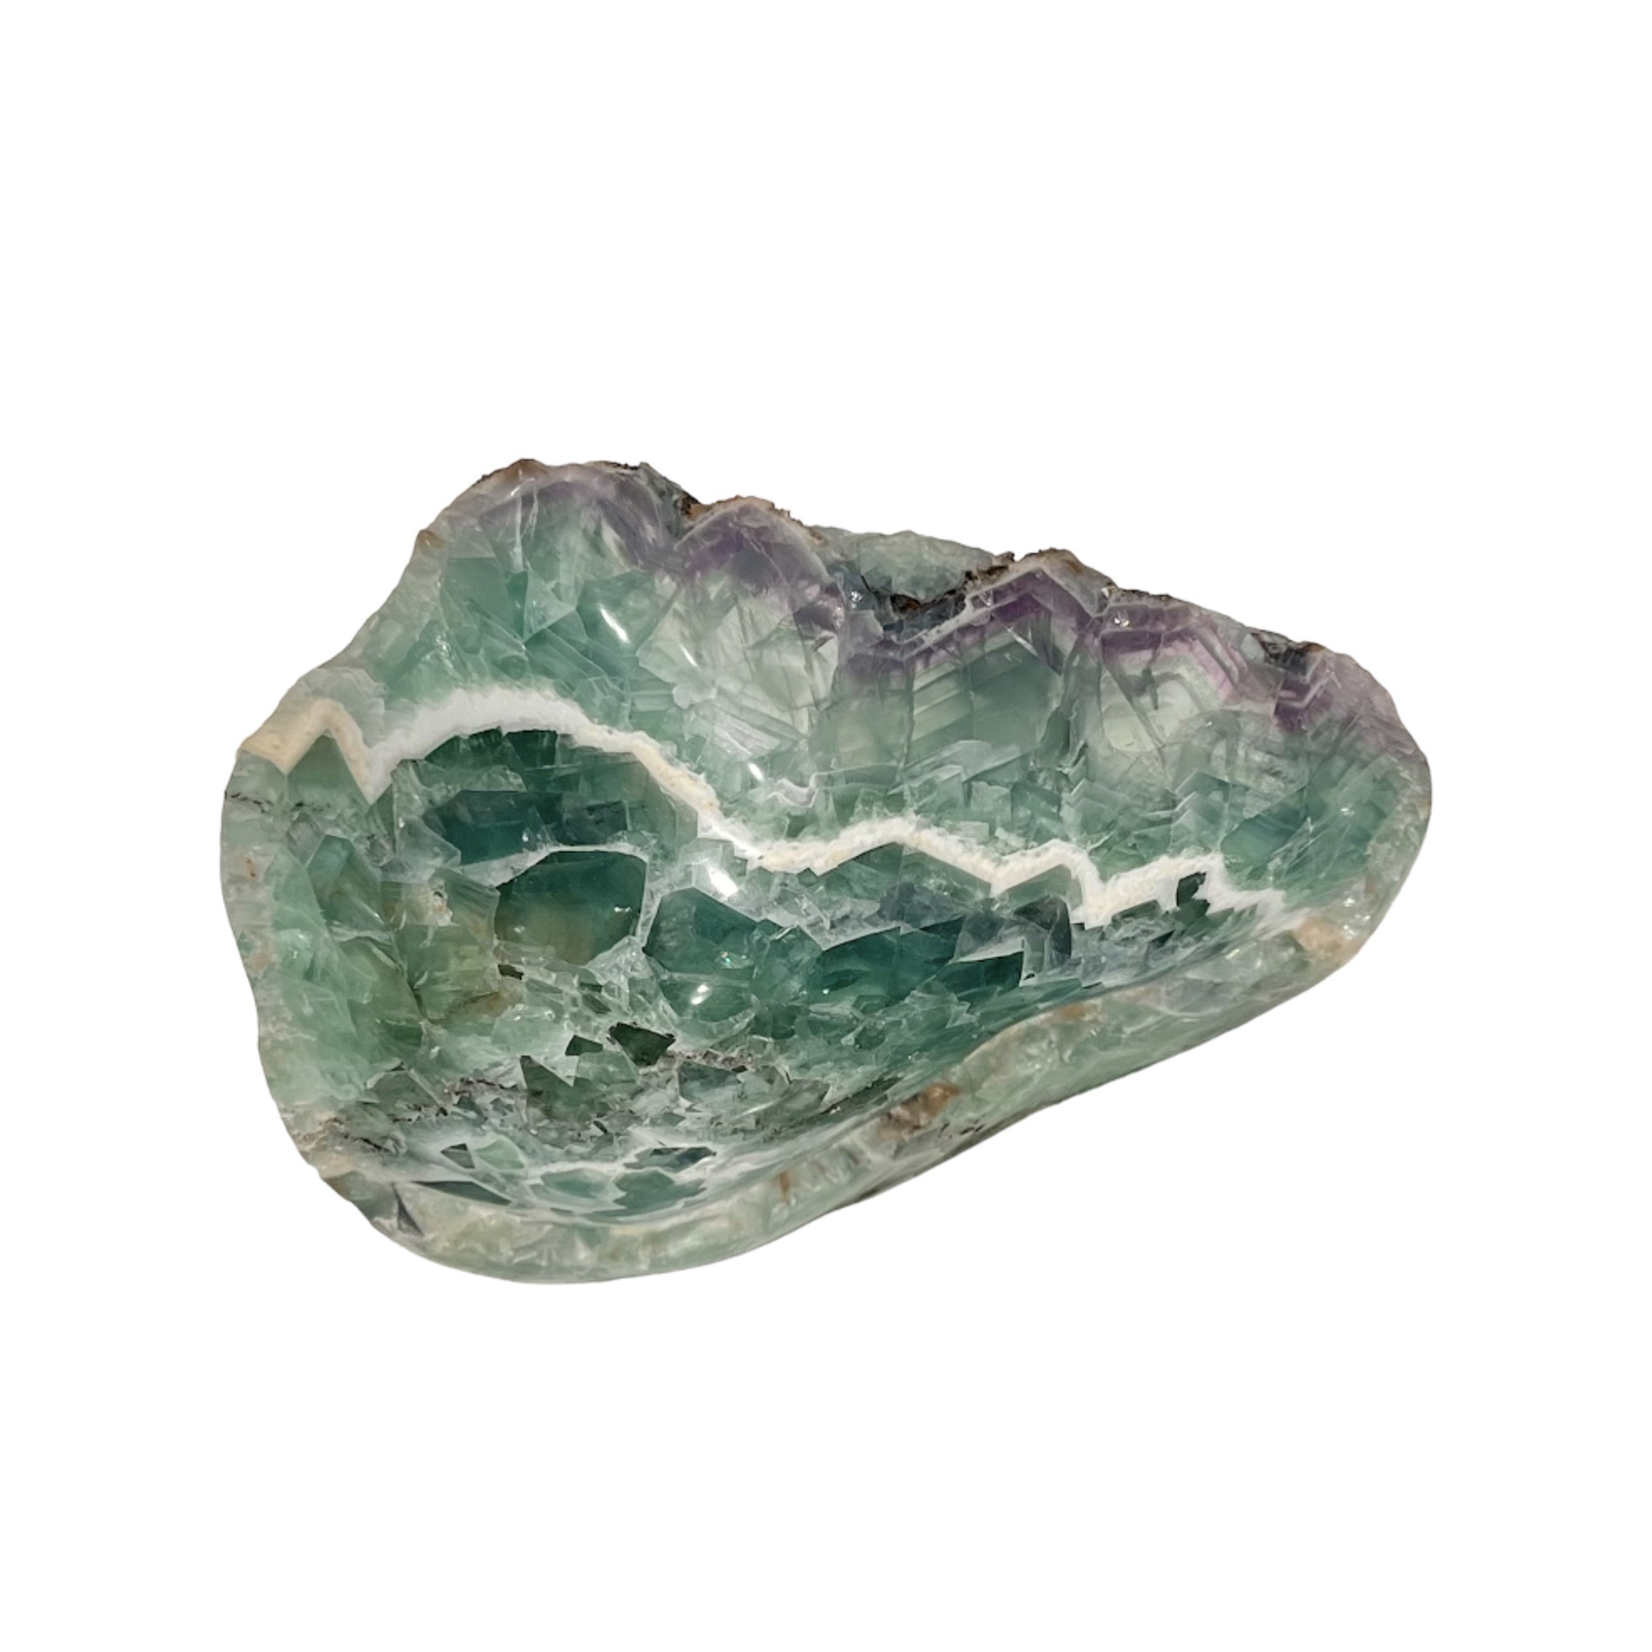 Outside The Box 9" Fluorite Hand-crafted Live Edge Bowl